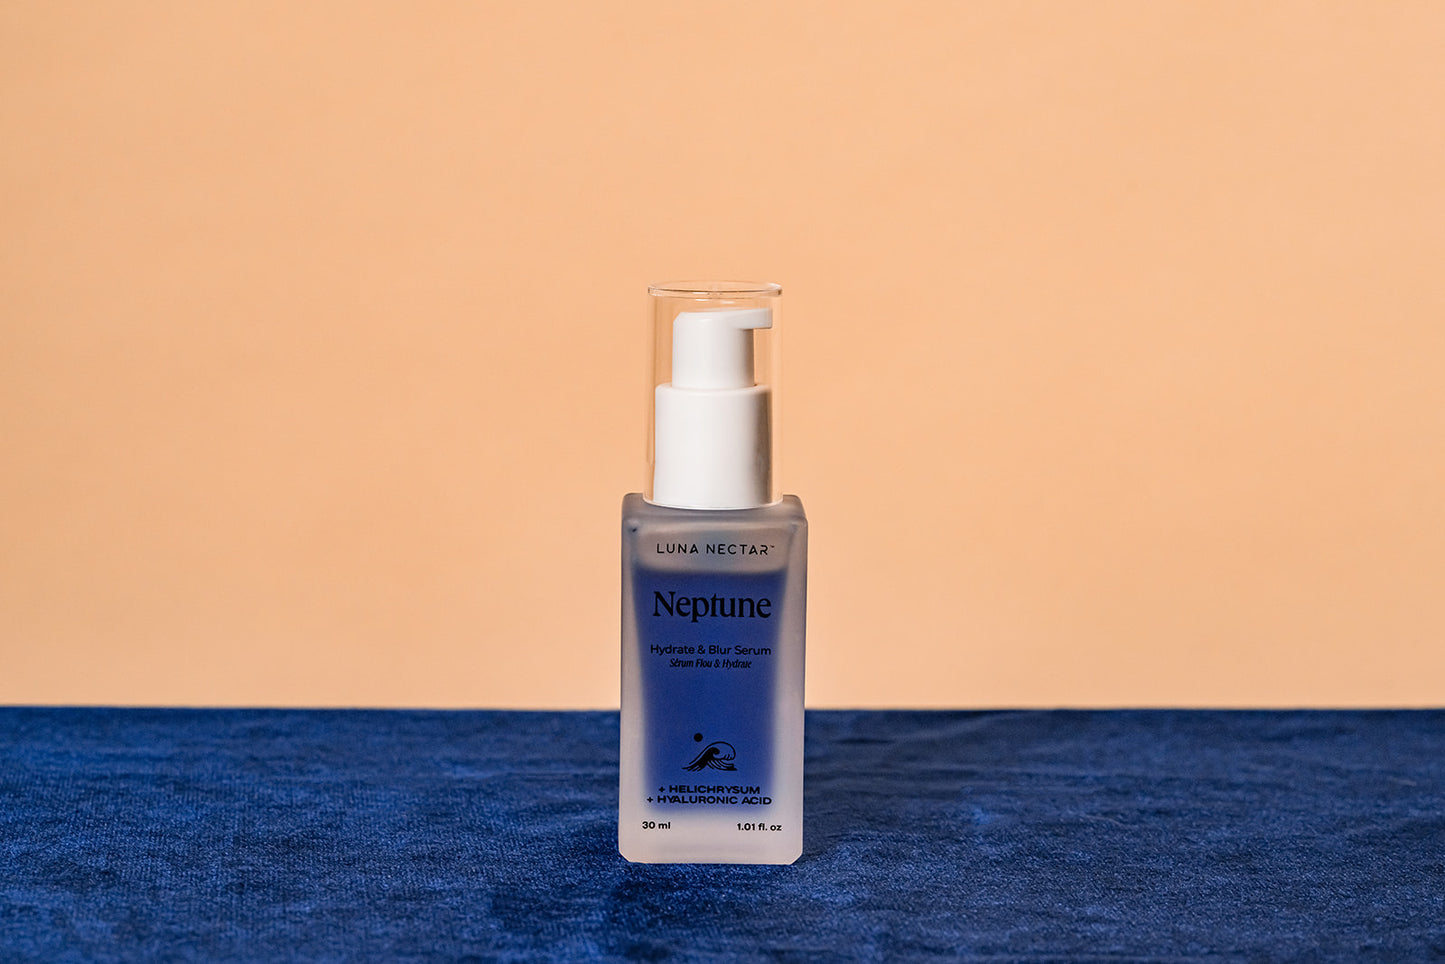 Hyaluronic acid is a skincare go-to for retaining moisture for healthy, glowing skin.